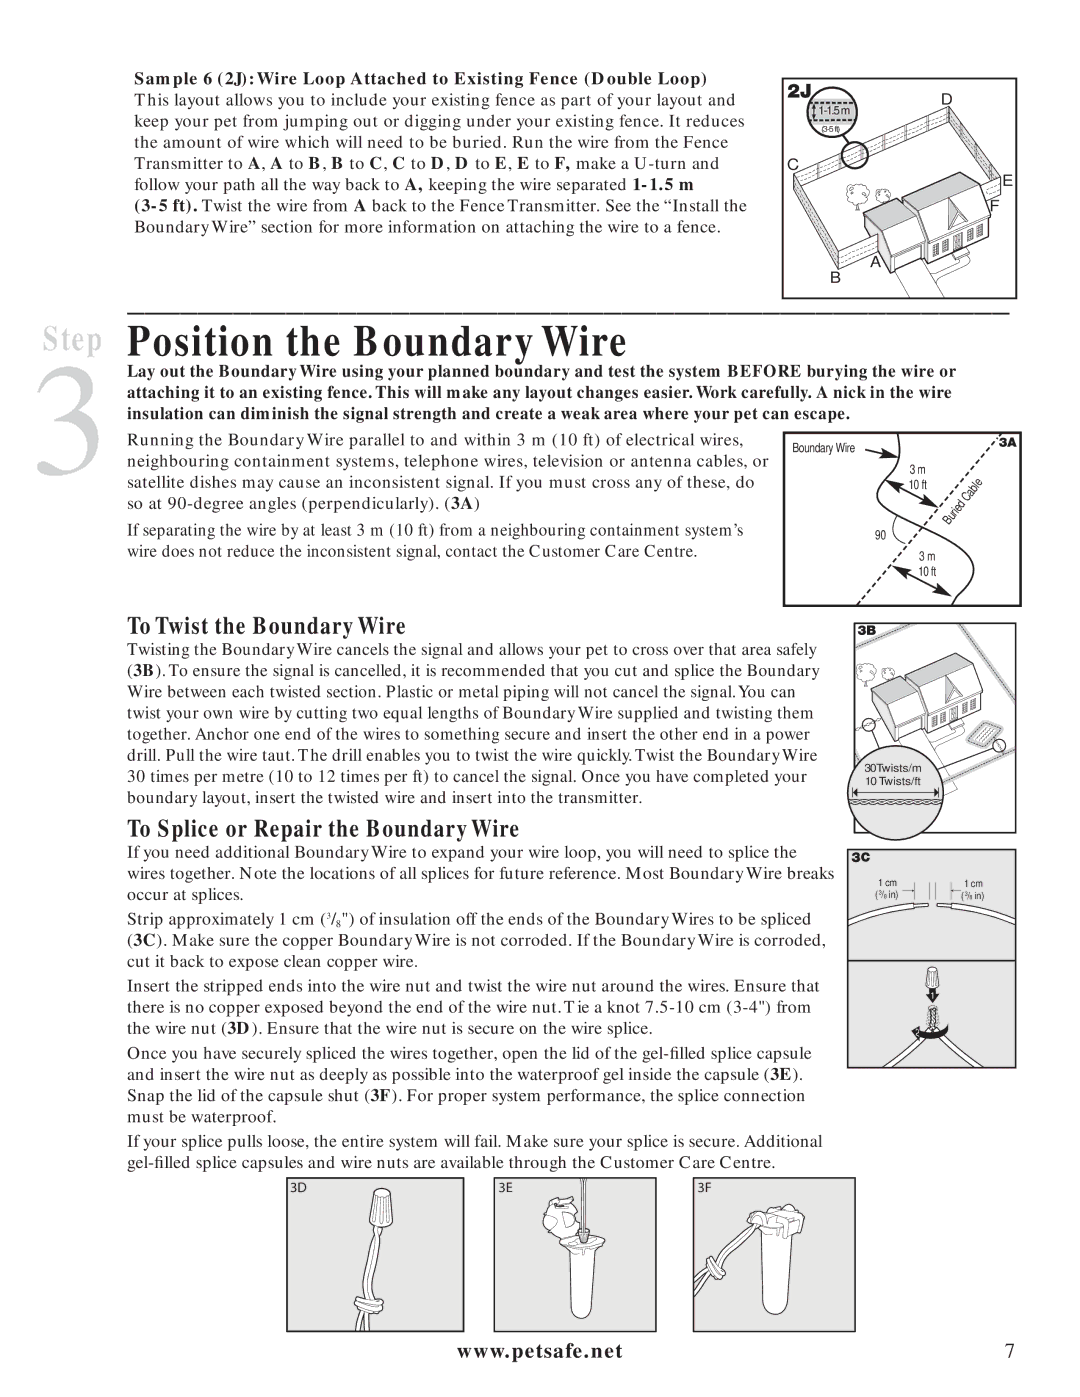 Petsafe PIG20-11041 Position the Boundary Wire, To Twist the Boundary Wire, To Splice or Repair the Boundary Wire 